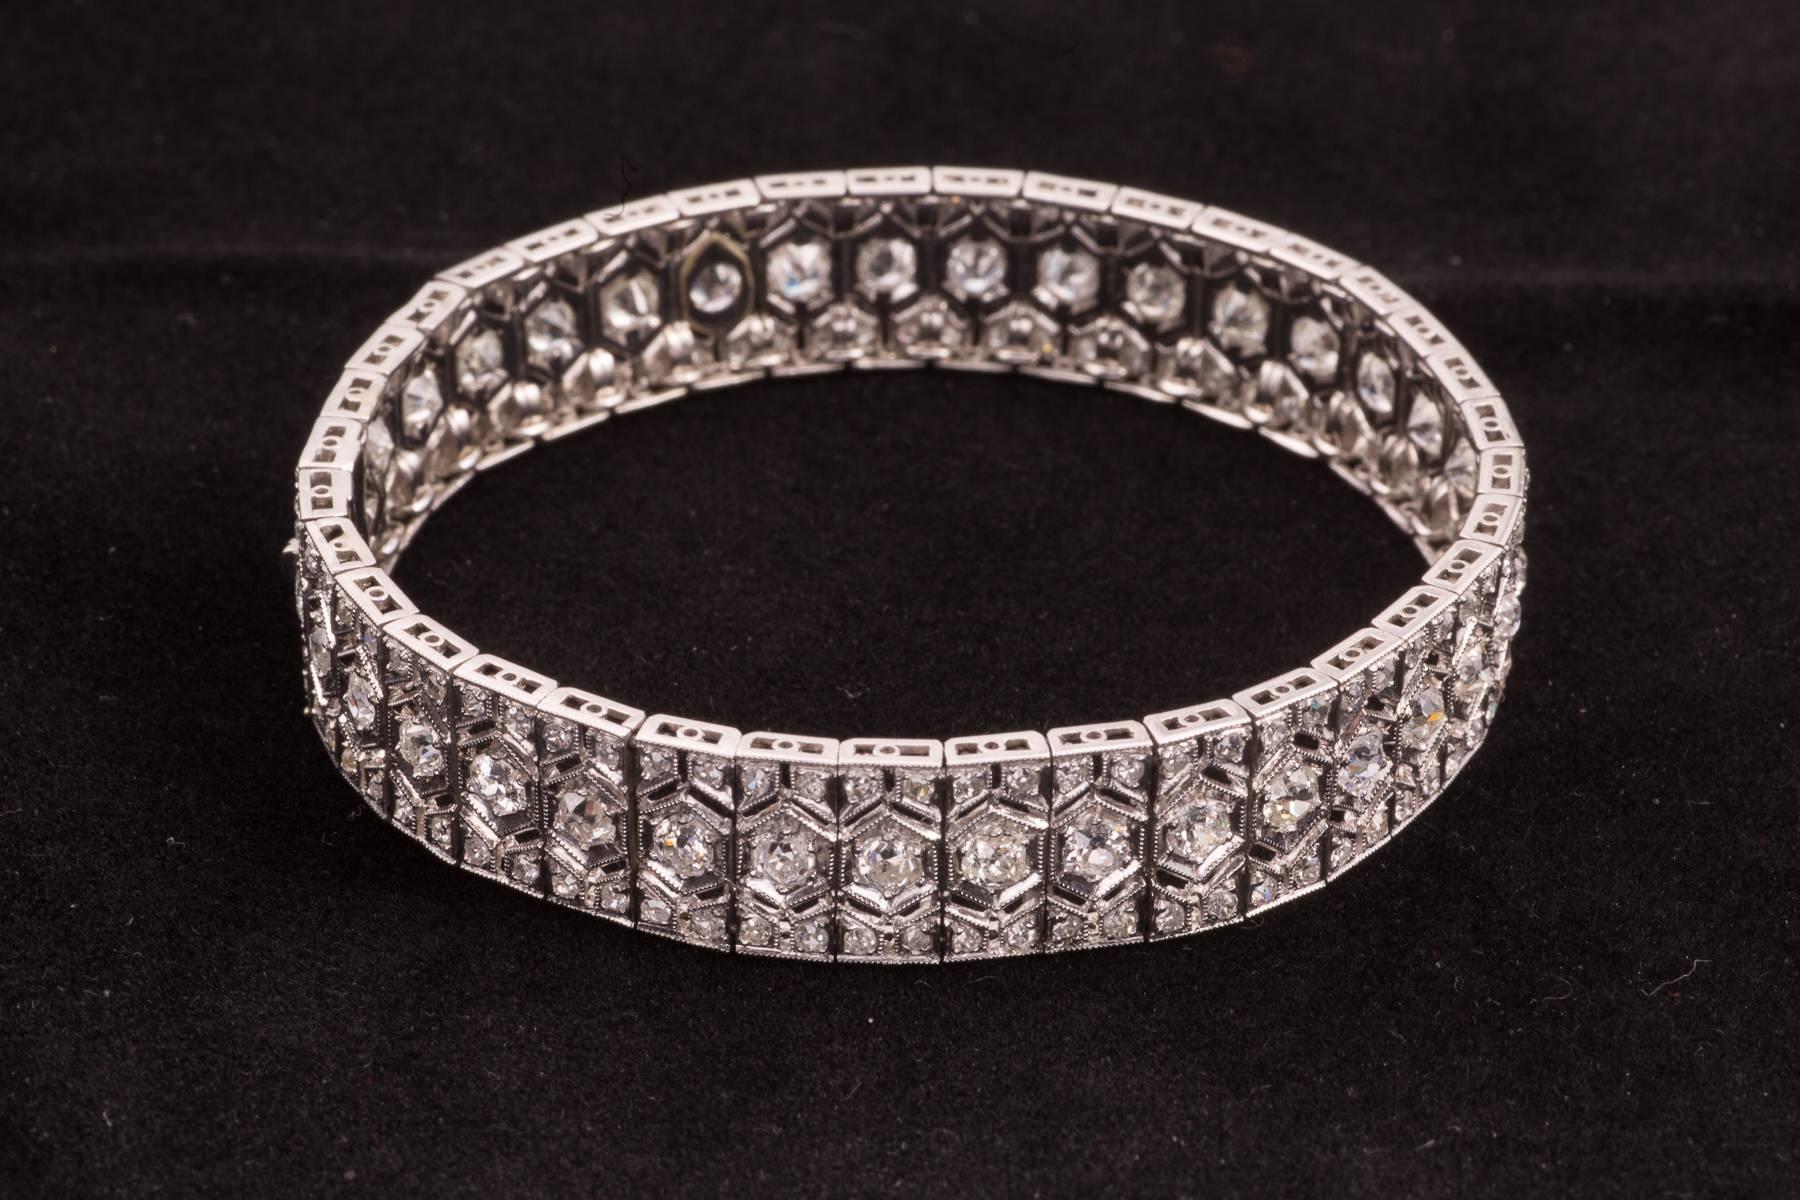 Period Art Deco diamond bracelet with approximately 10.00cts of G-H color, VS-SI1 clarity, large european and smaller single cut diamonds. Circa. 1925.